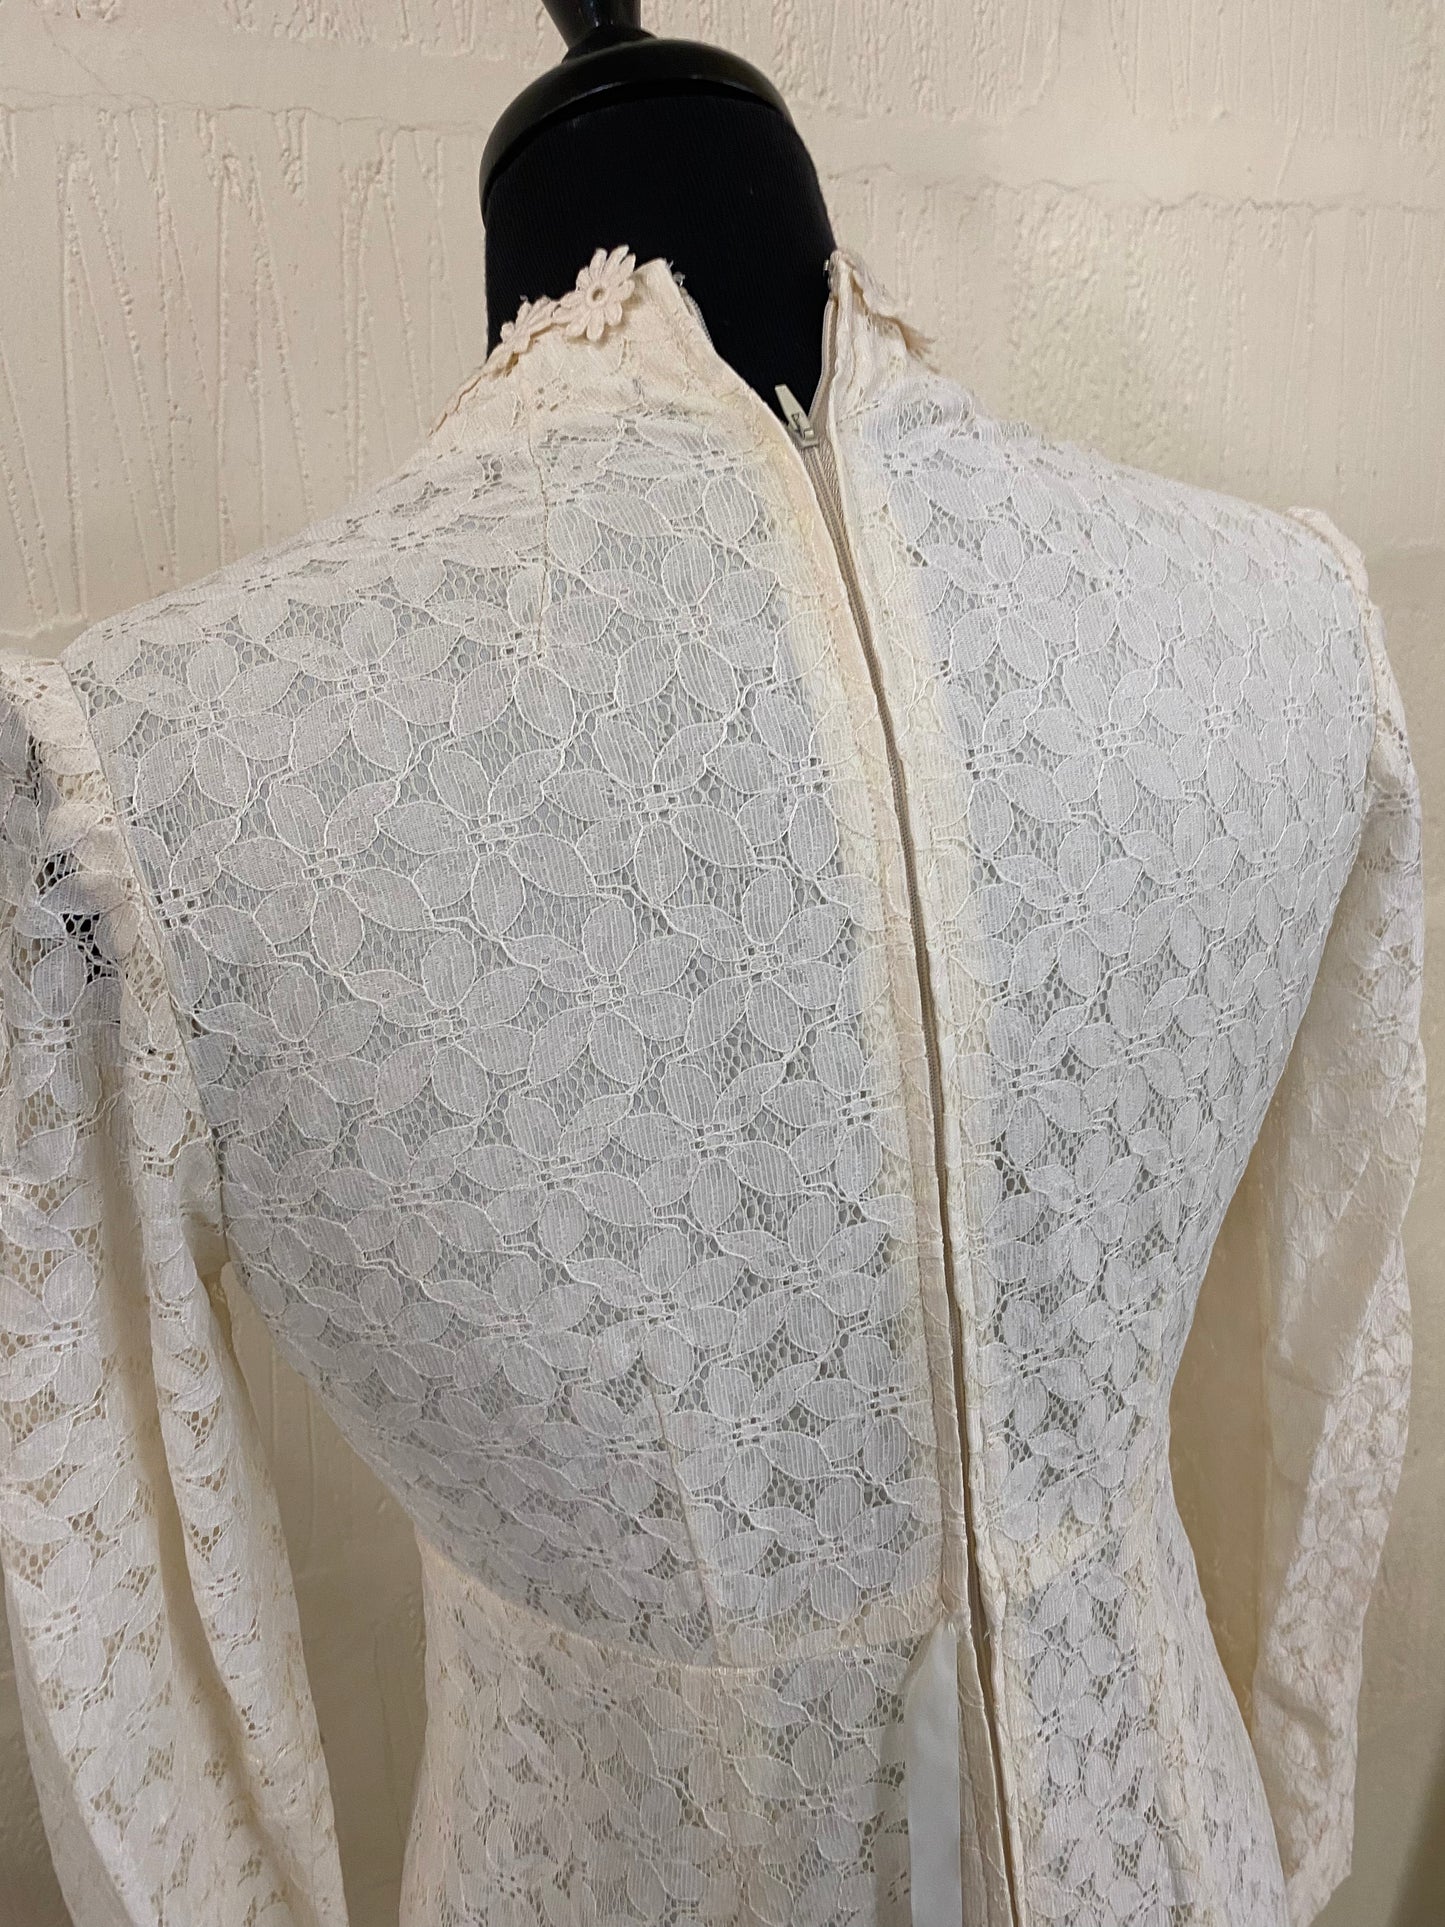 Hand Made 1960s Vintage Cream Lace Wedding Maxi Dress Size 8